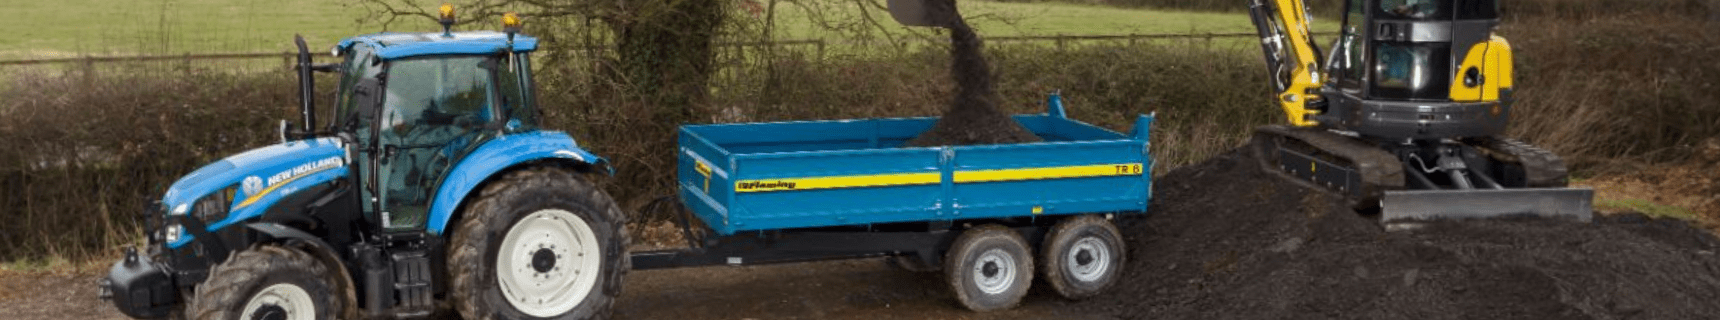 Harry West Trailers – Flatbed/Bale Trailer Head Image